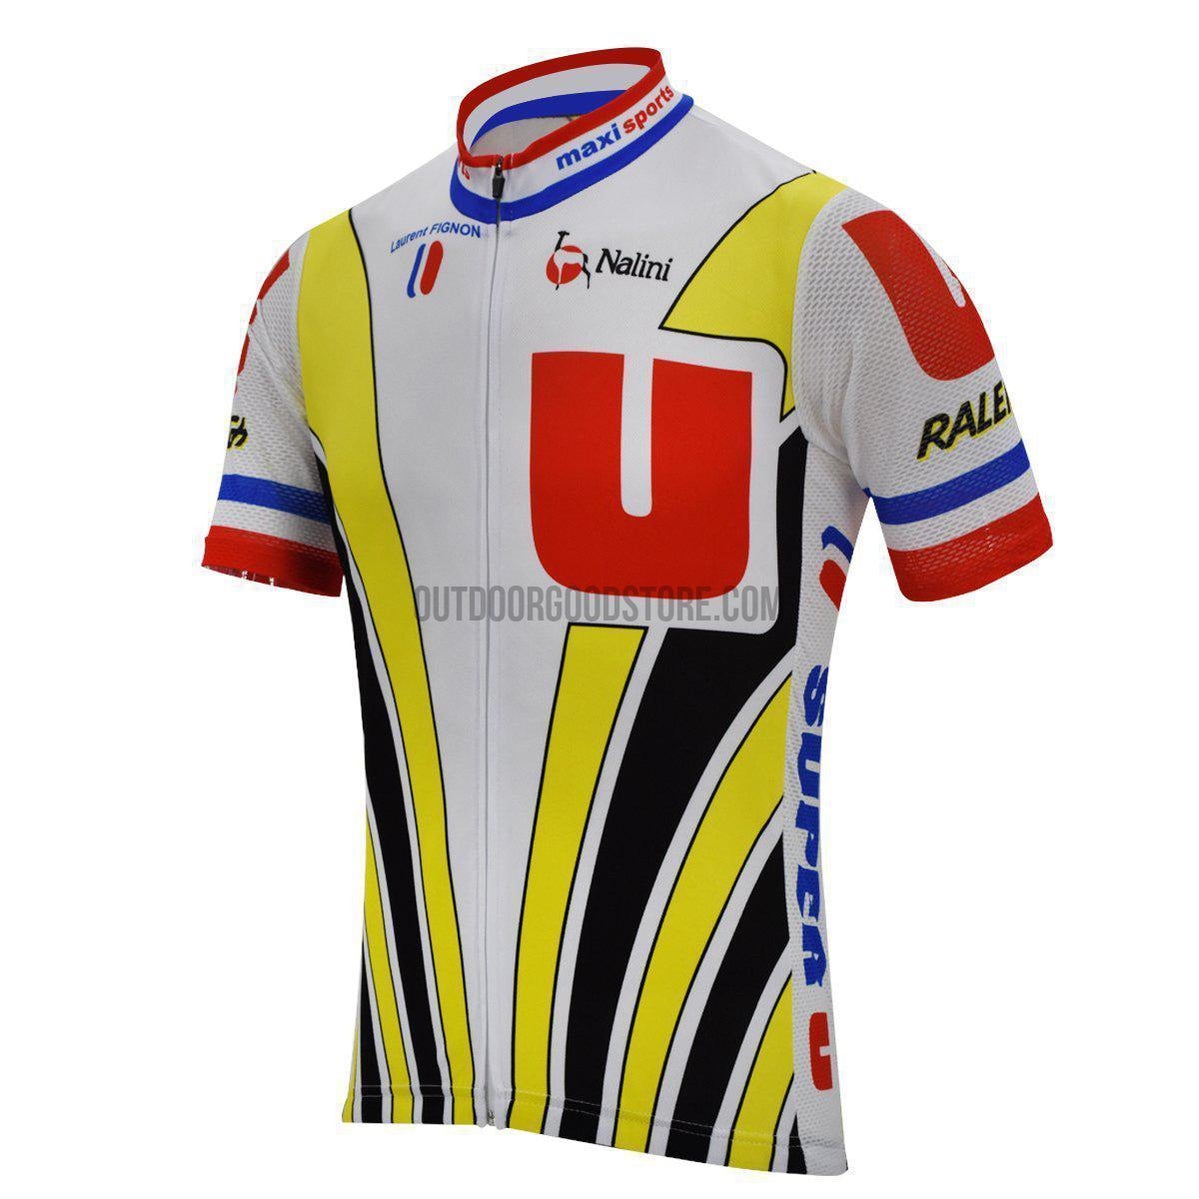 Closed – Signed Ciccone 2019 Yellow Tour de France jersey brought to you by  Trek Bicycle Maple Ridge – Ride For Clean Energy